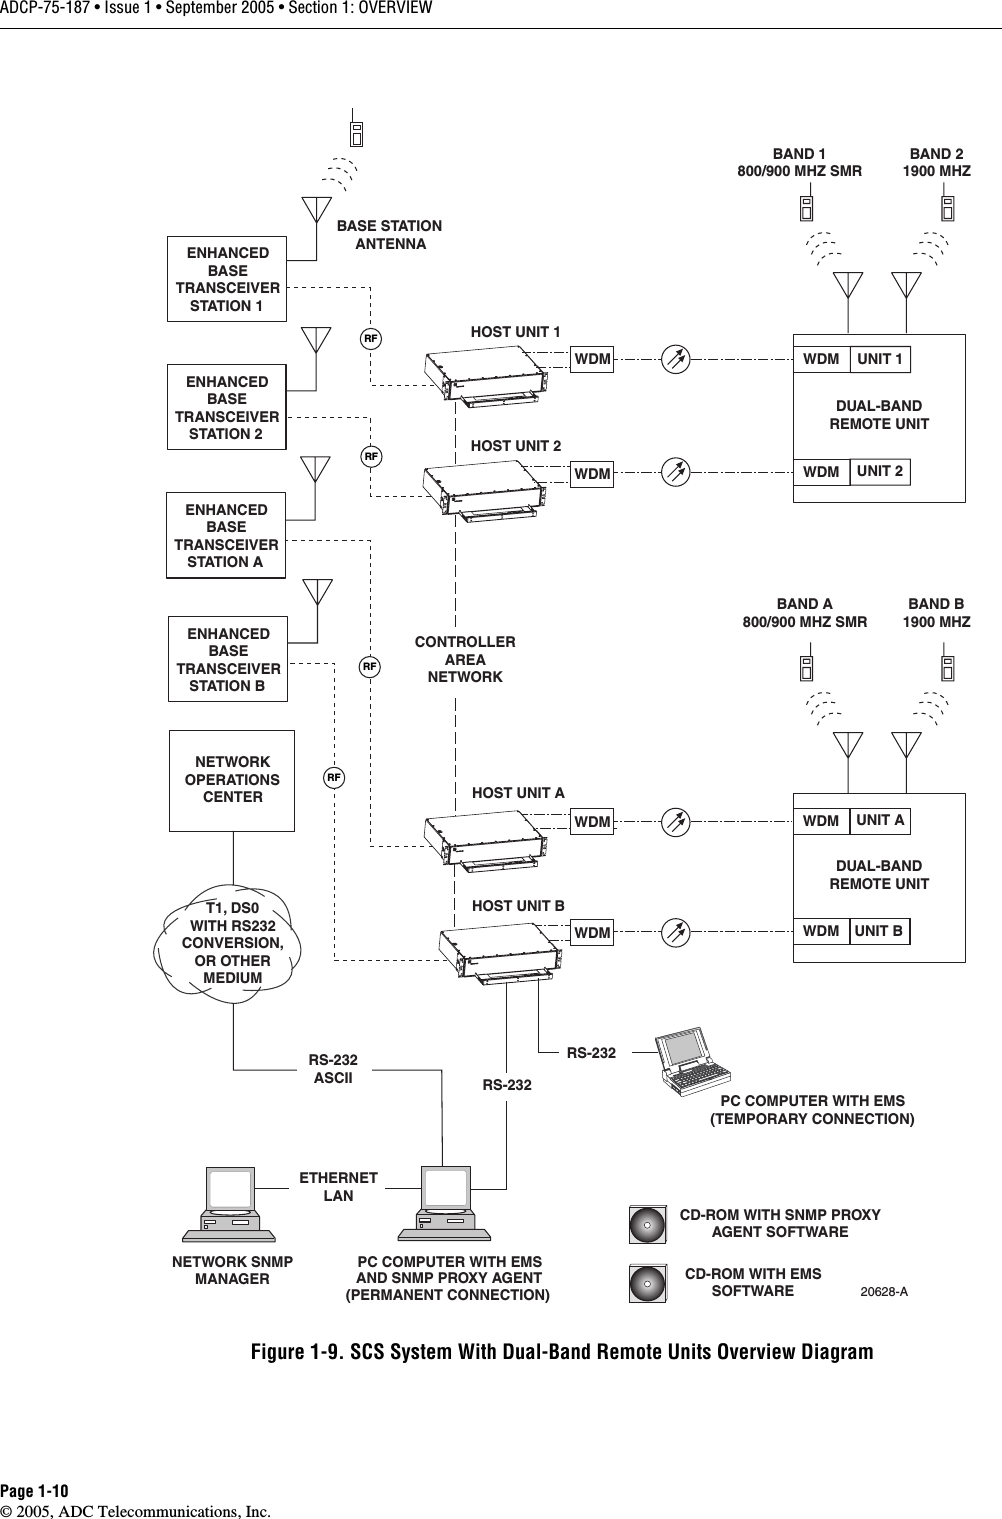 ADCP-75-187 • Issue 1 • September 2005 • Section 1: OVERVIEWPage 1-10© 2005, ADC Telecommunications, Inc.Figure 1-9. SCS System With Dual-Band Remote Units Overview DiagramPC COMPUTER WITH EMSAND SNMP PROXY AGENT(PERMANENT CONNECTION) HOST UNIT 1HOST UNIT 2HOST UNIT AHOST UNIT BNETWORKOPERATIONSCENTERPC COMPUTER WITH EMS(TEMPORARY CONNECTION)T1, DS0WITH RS232CONVERSION,OR OTHERMEDIUMRS-232ASCII RS-23220628-ACD-ROM WITH EMSSOFTWARERFRS-232NETWORK SNMPMANAGERCD-ROM WITH SNMP PROXYAGENT SOFTWAREETHERNETLANDUAL-BANDREMOTE UNITDUAL-BANDREMOTE UNITCONTROLLERAREANETWORKBAND 1800/900 MHZ SMRBAND A800/900 MHZ SMRBAND 21900 MHZBAND B1900 MHZBASE STATIONANTENNAENHANCEDBASETRANSCEIVERSTATION 1ENHANCEDBASETRANSCEIVERSTATION 2ENHANCEDBASETRANSCEIVERSTATION BENHANCEDBASETRANSCEIVERSTATION ARFRFRFUNIT 1UNIT 2UNIT AUNIT BWDMWDMWDMWDMWDMWDMWDMWDM